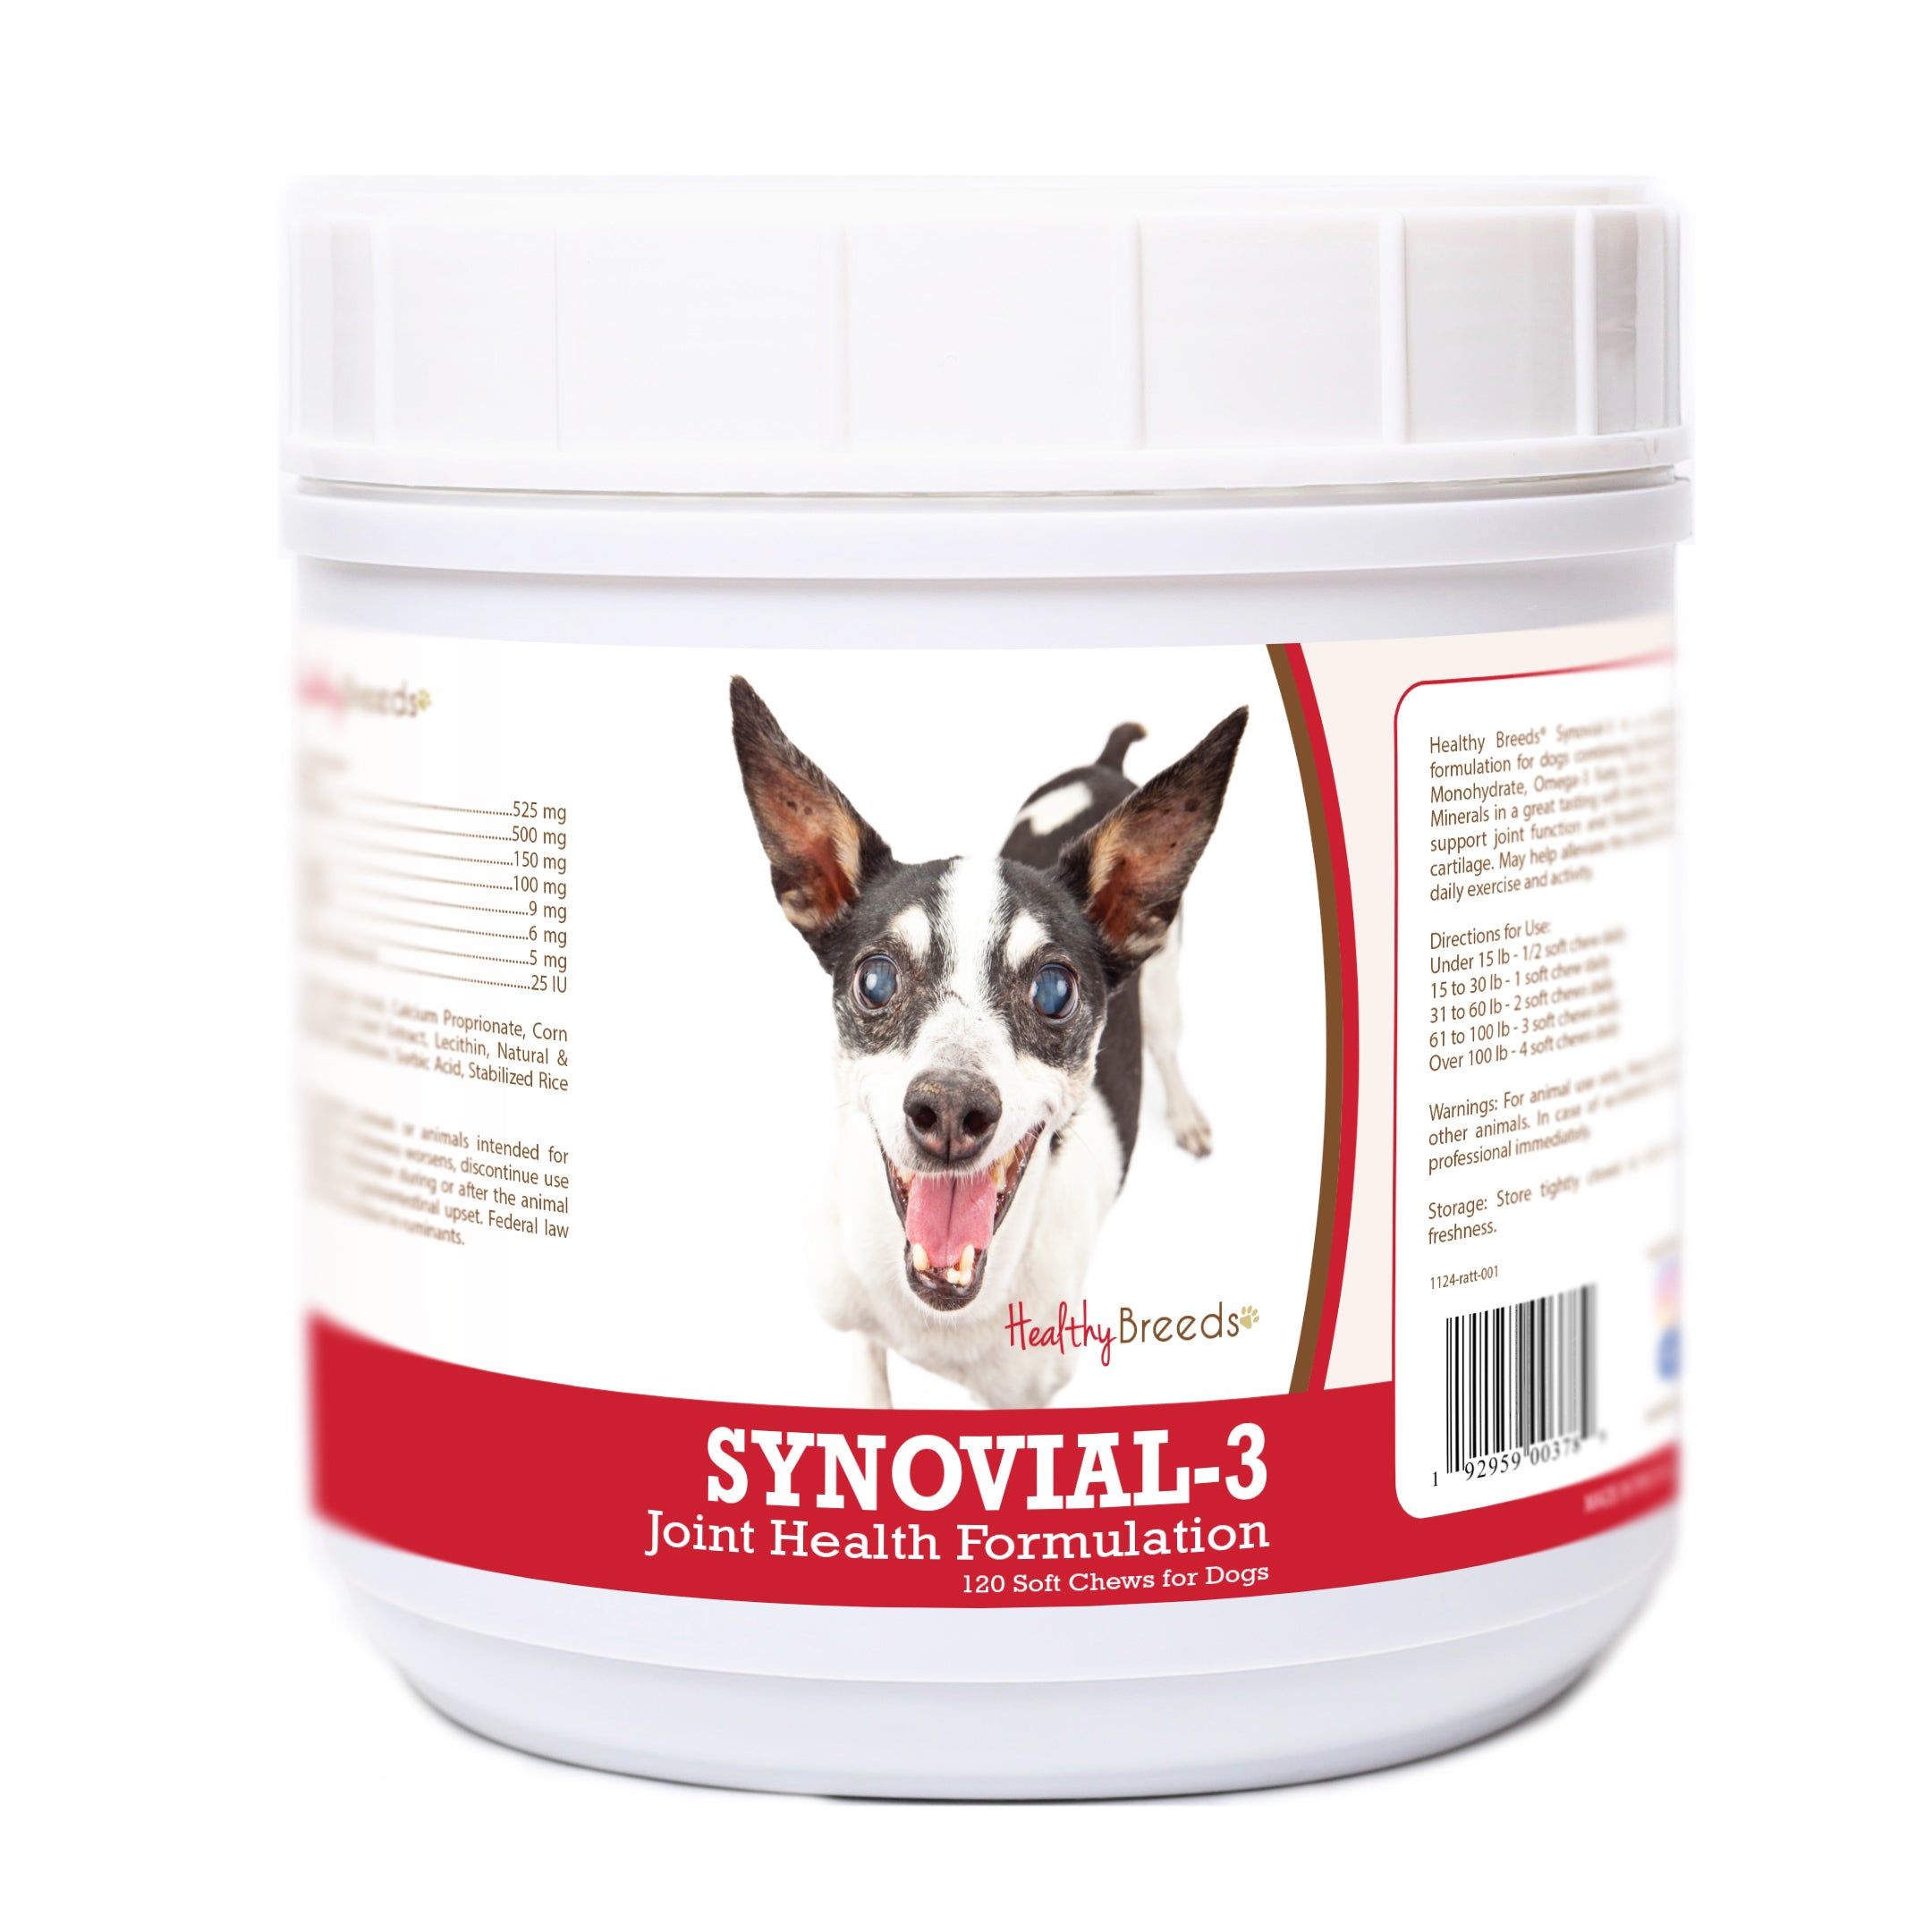 Rat Terrier Synovial-3 Joint Health Formulation Soft Chews 120 Count